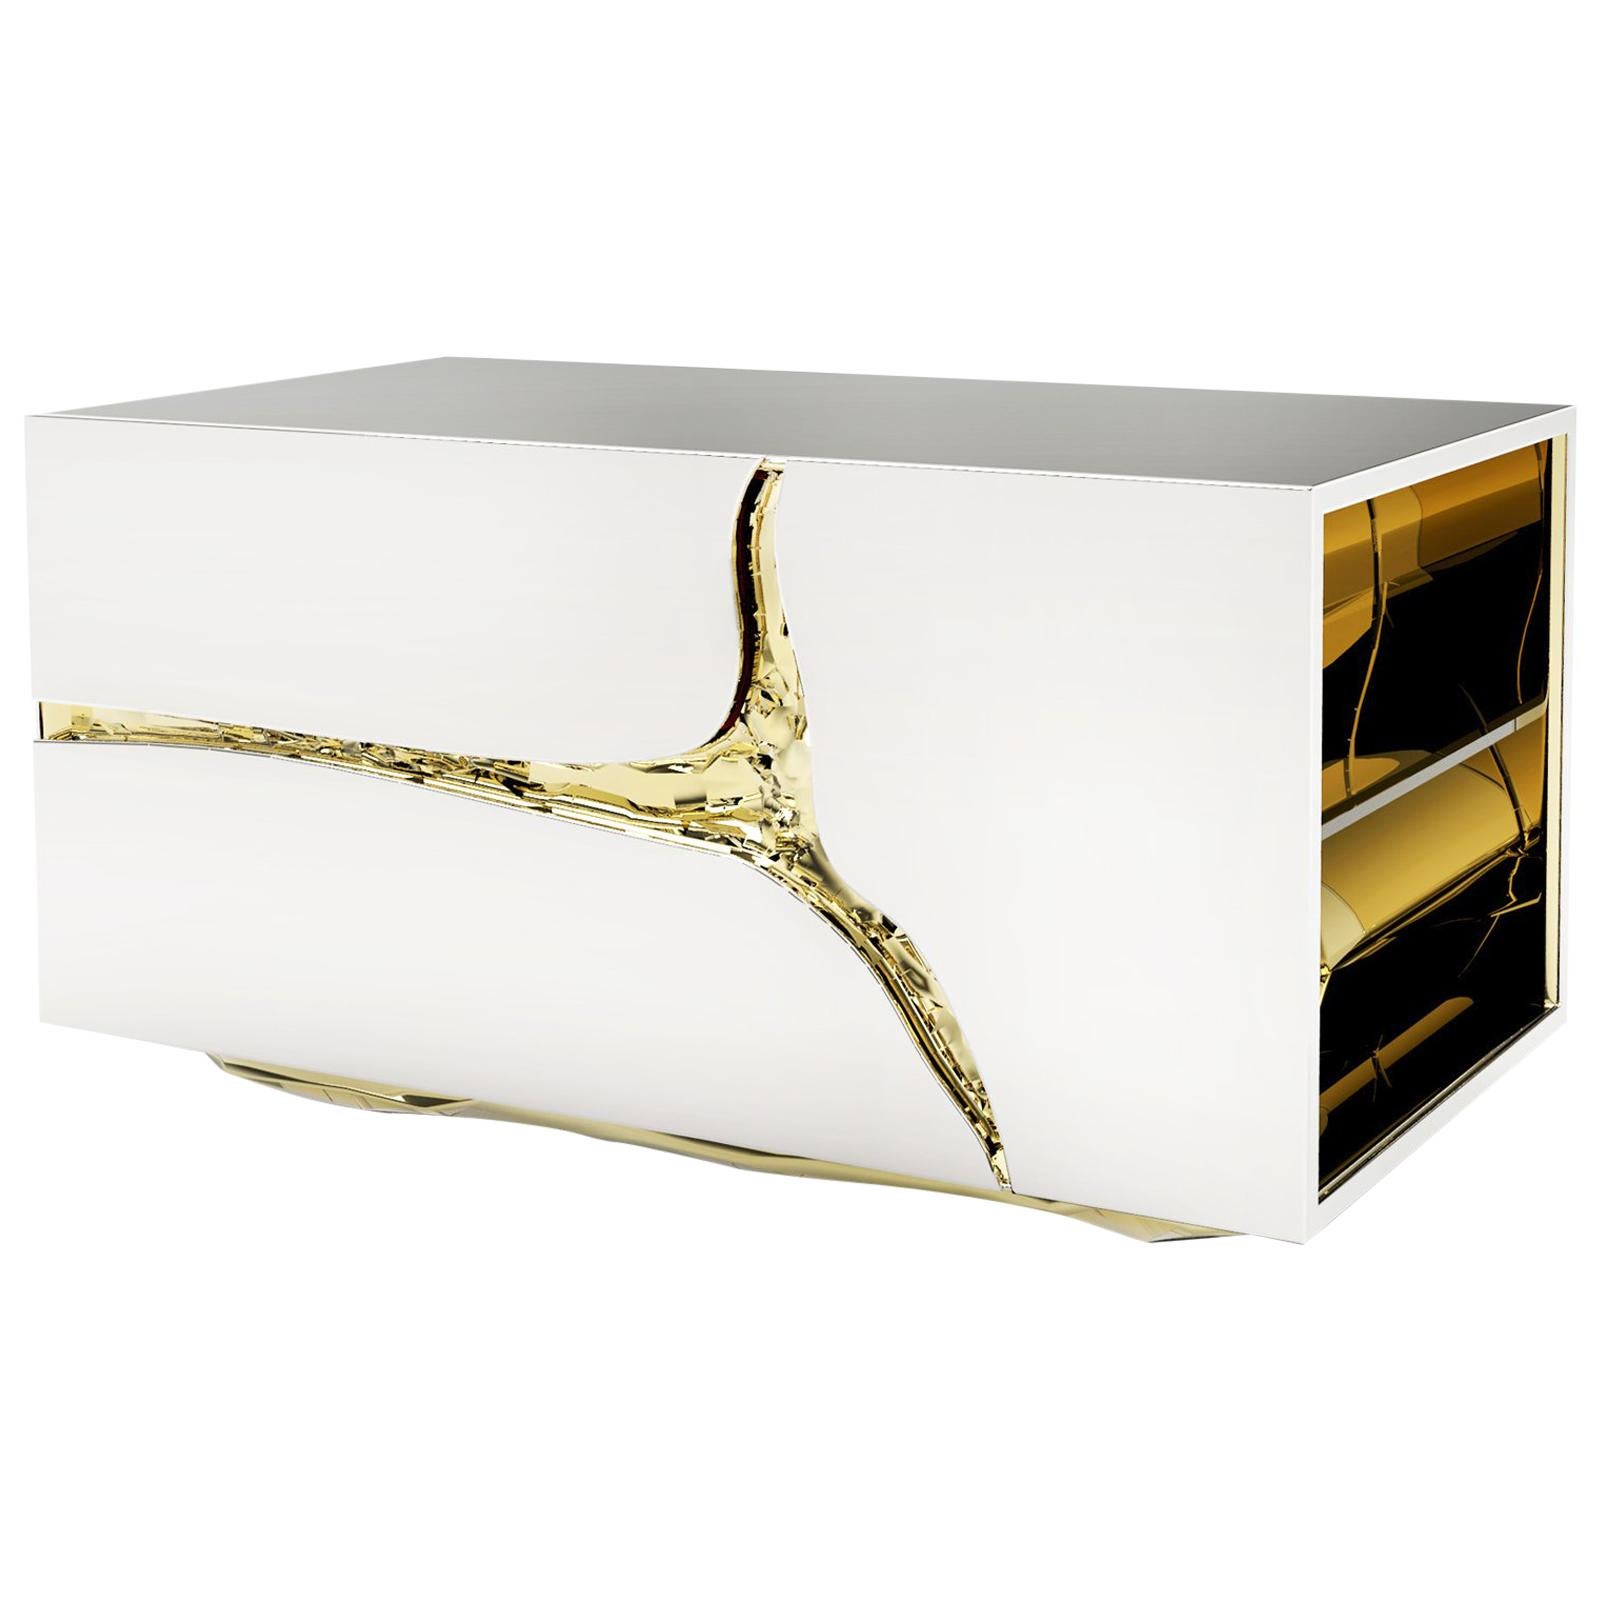 Paradise Nightstand or Side Table in Polished Stainless Steel